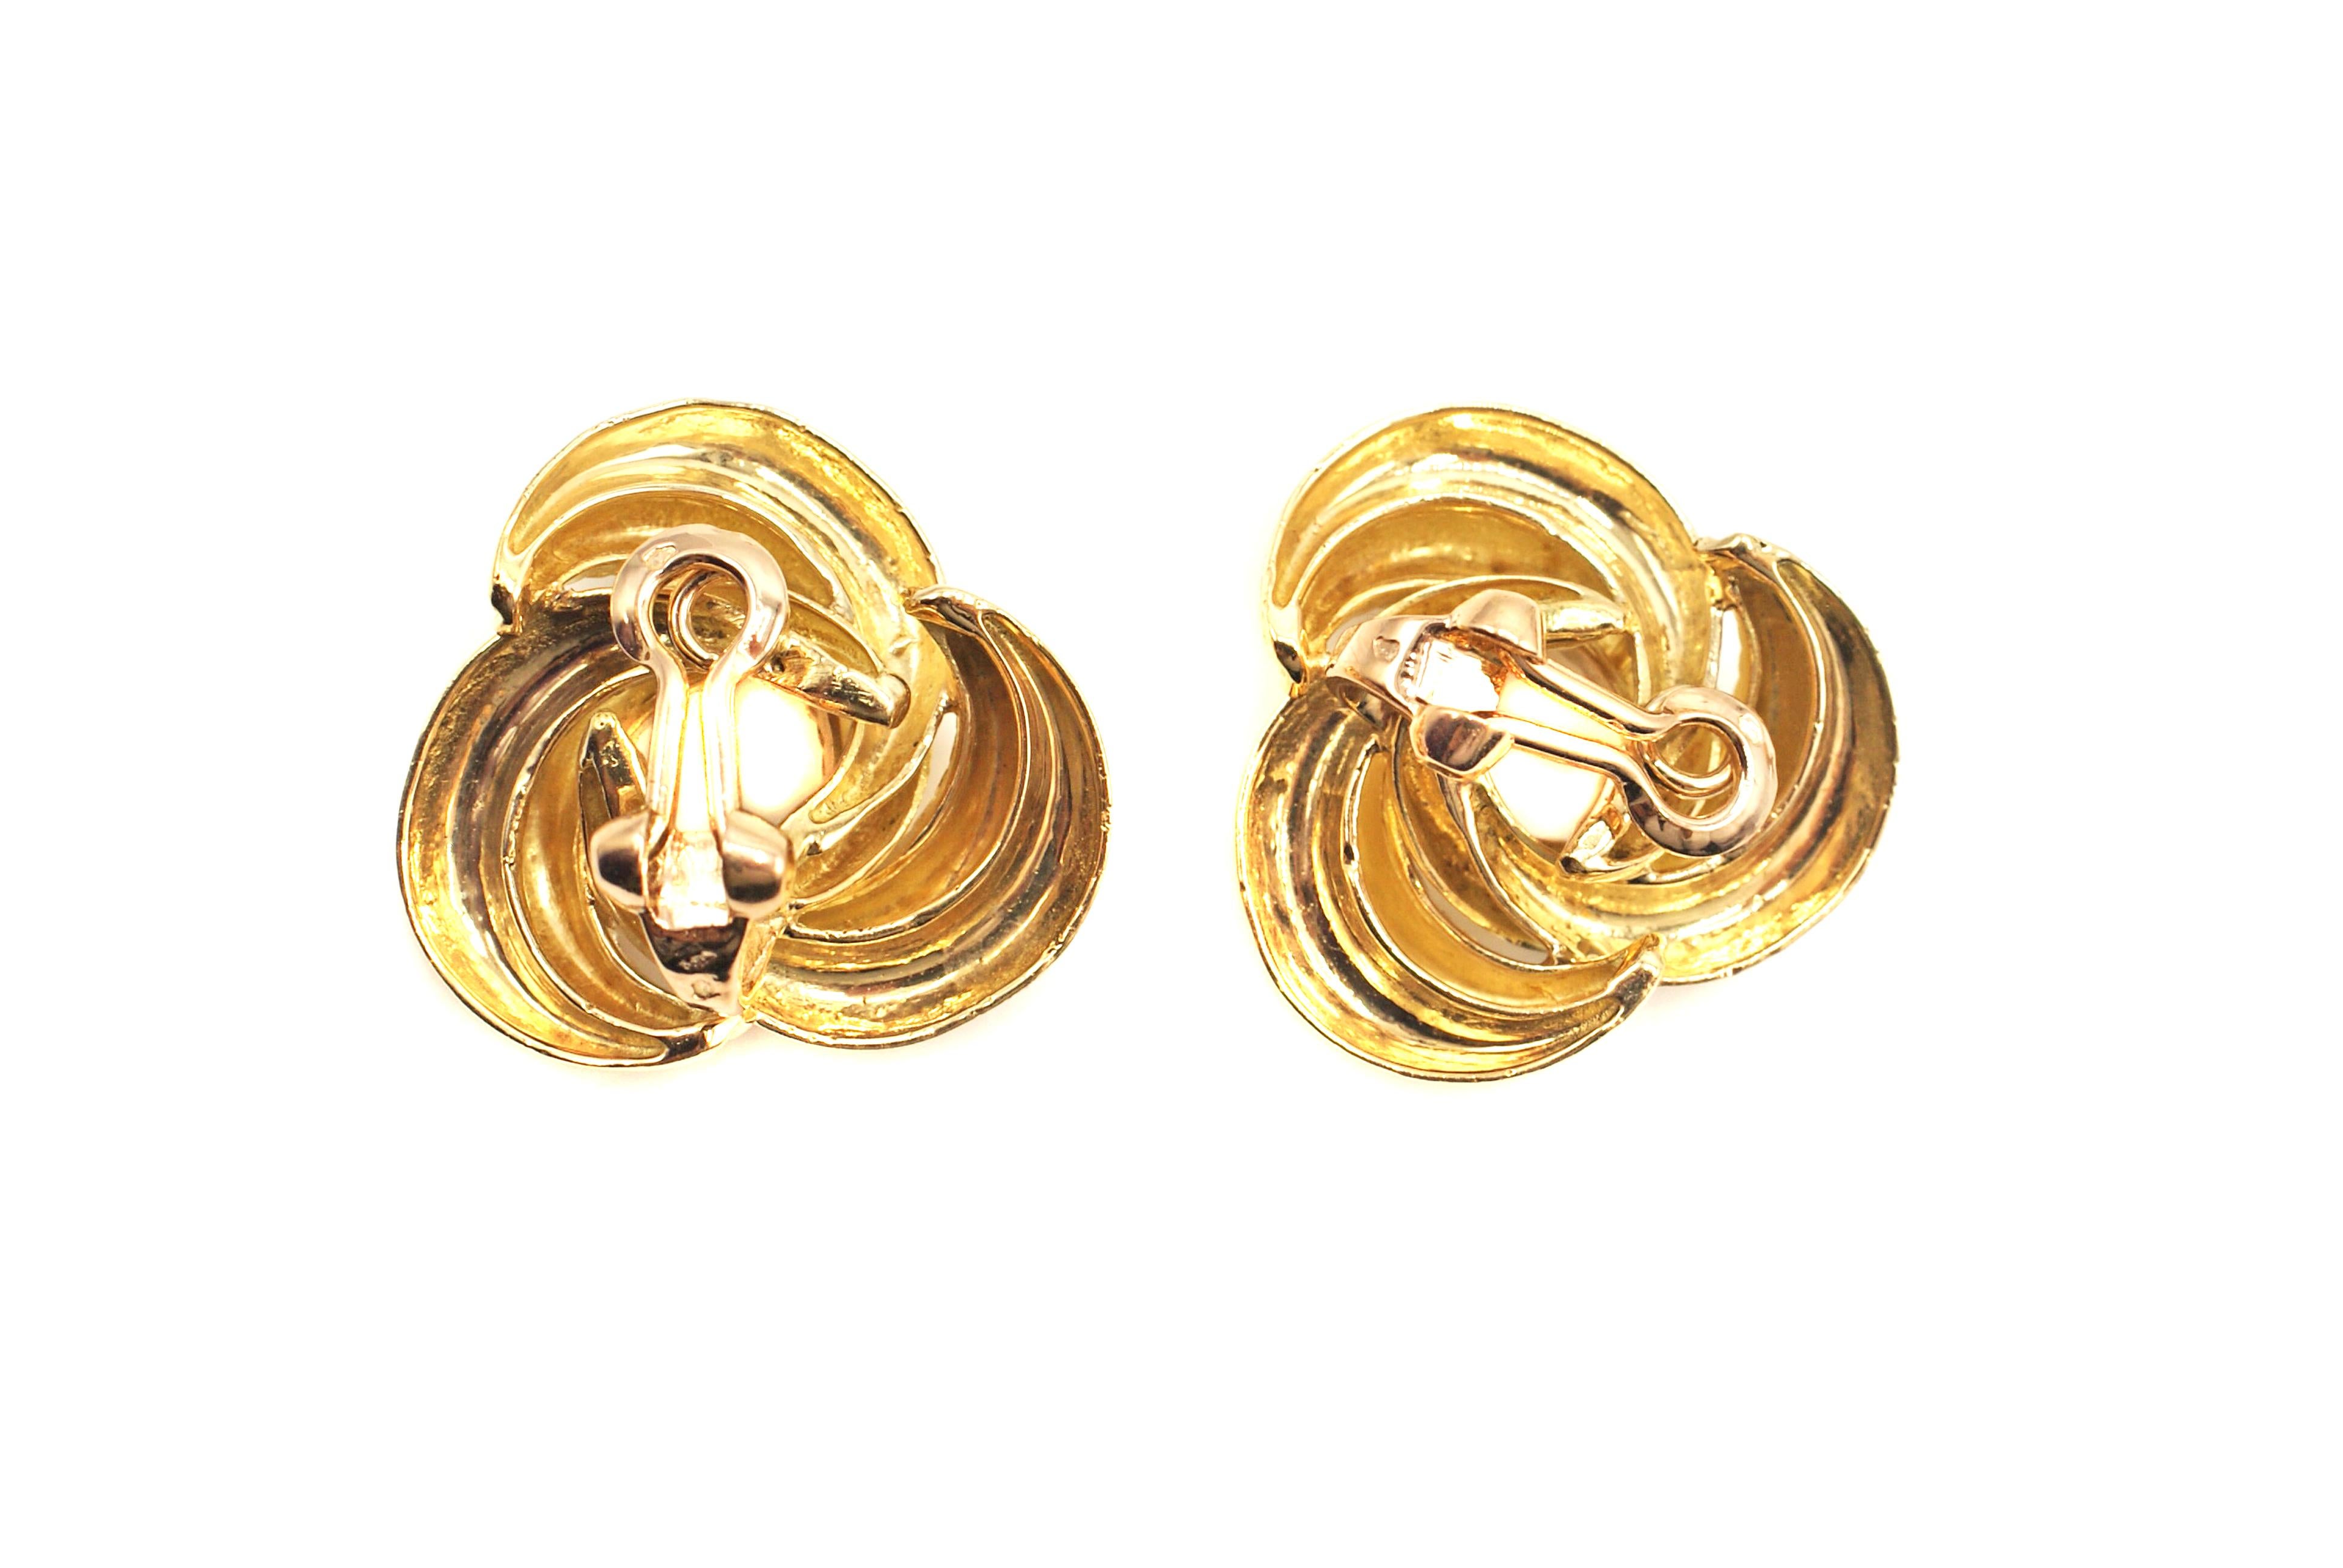 Chic 18 karat yellow gold 1960s ear-clips masterfully hand-crafted as interlocking polished braids of gold. The earring is secured by a comfortable omega back and the weight is perfect for a continuous comfortable wear. French hallmarks on back of